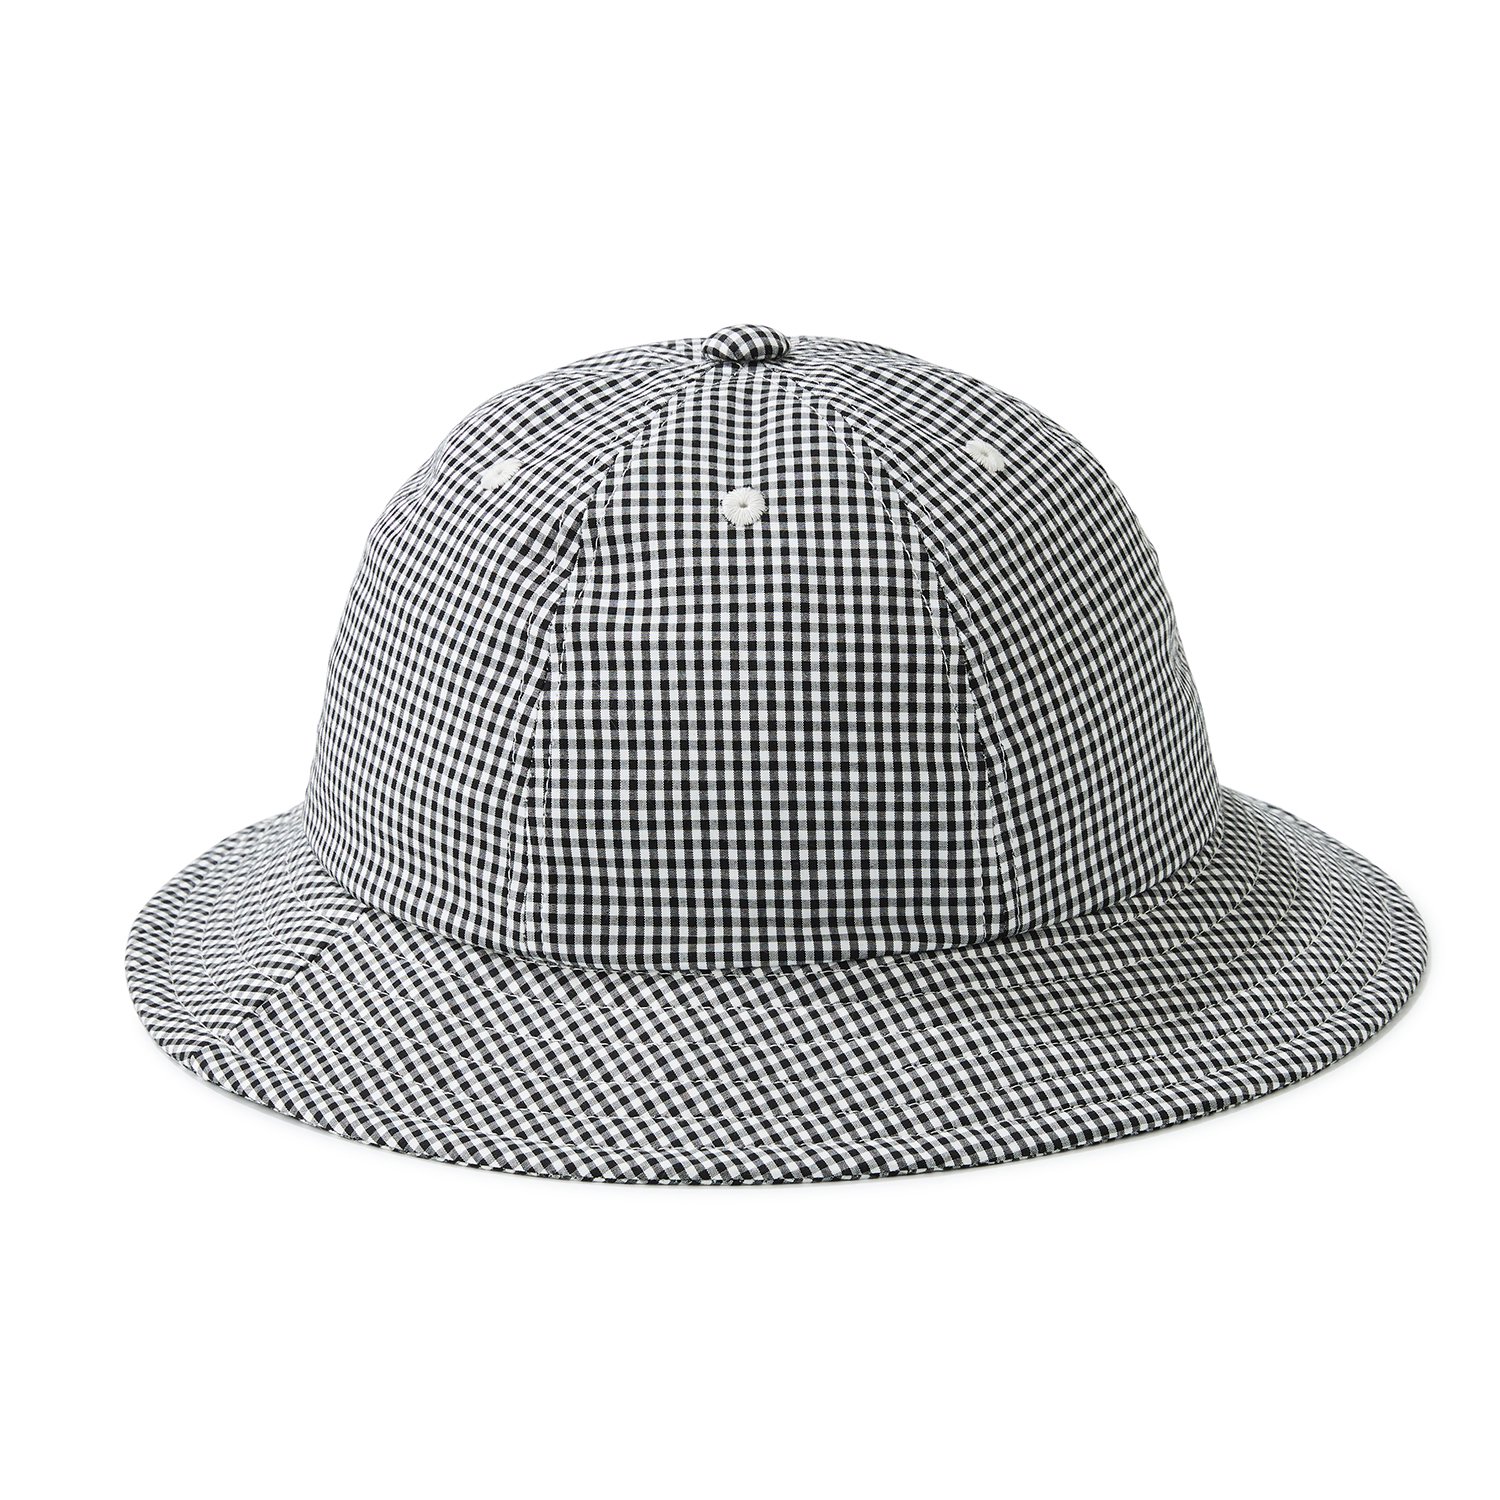 <img class='new_mark_img1' src='https://img.shop-pro.jp/img/new/icons8.gif' style='border:none;display:inline;margin:0px;padding:0px;width:auto;' />EFILEVOL եܥ / Gingham Checked Hat